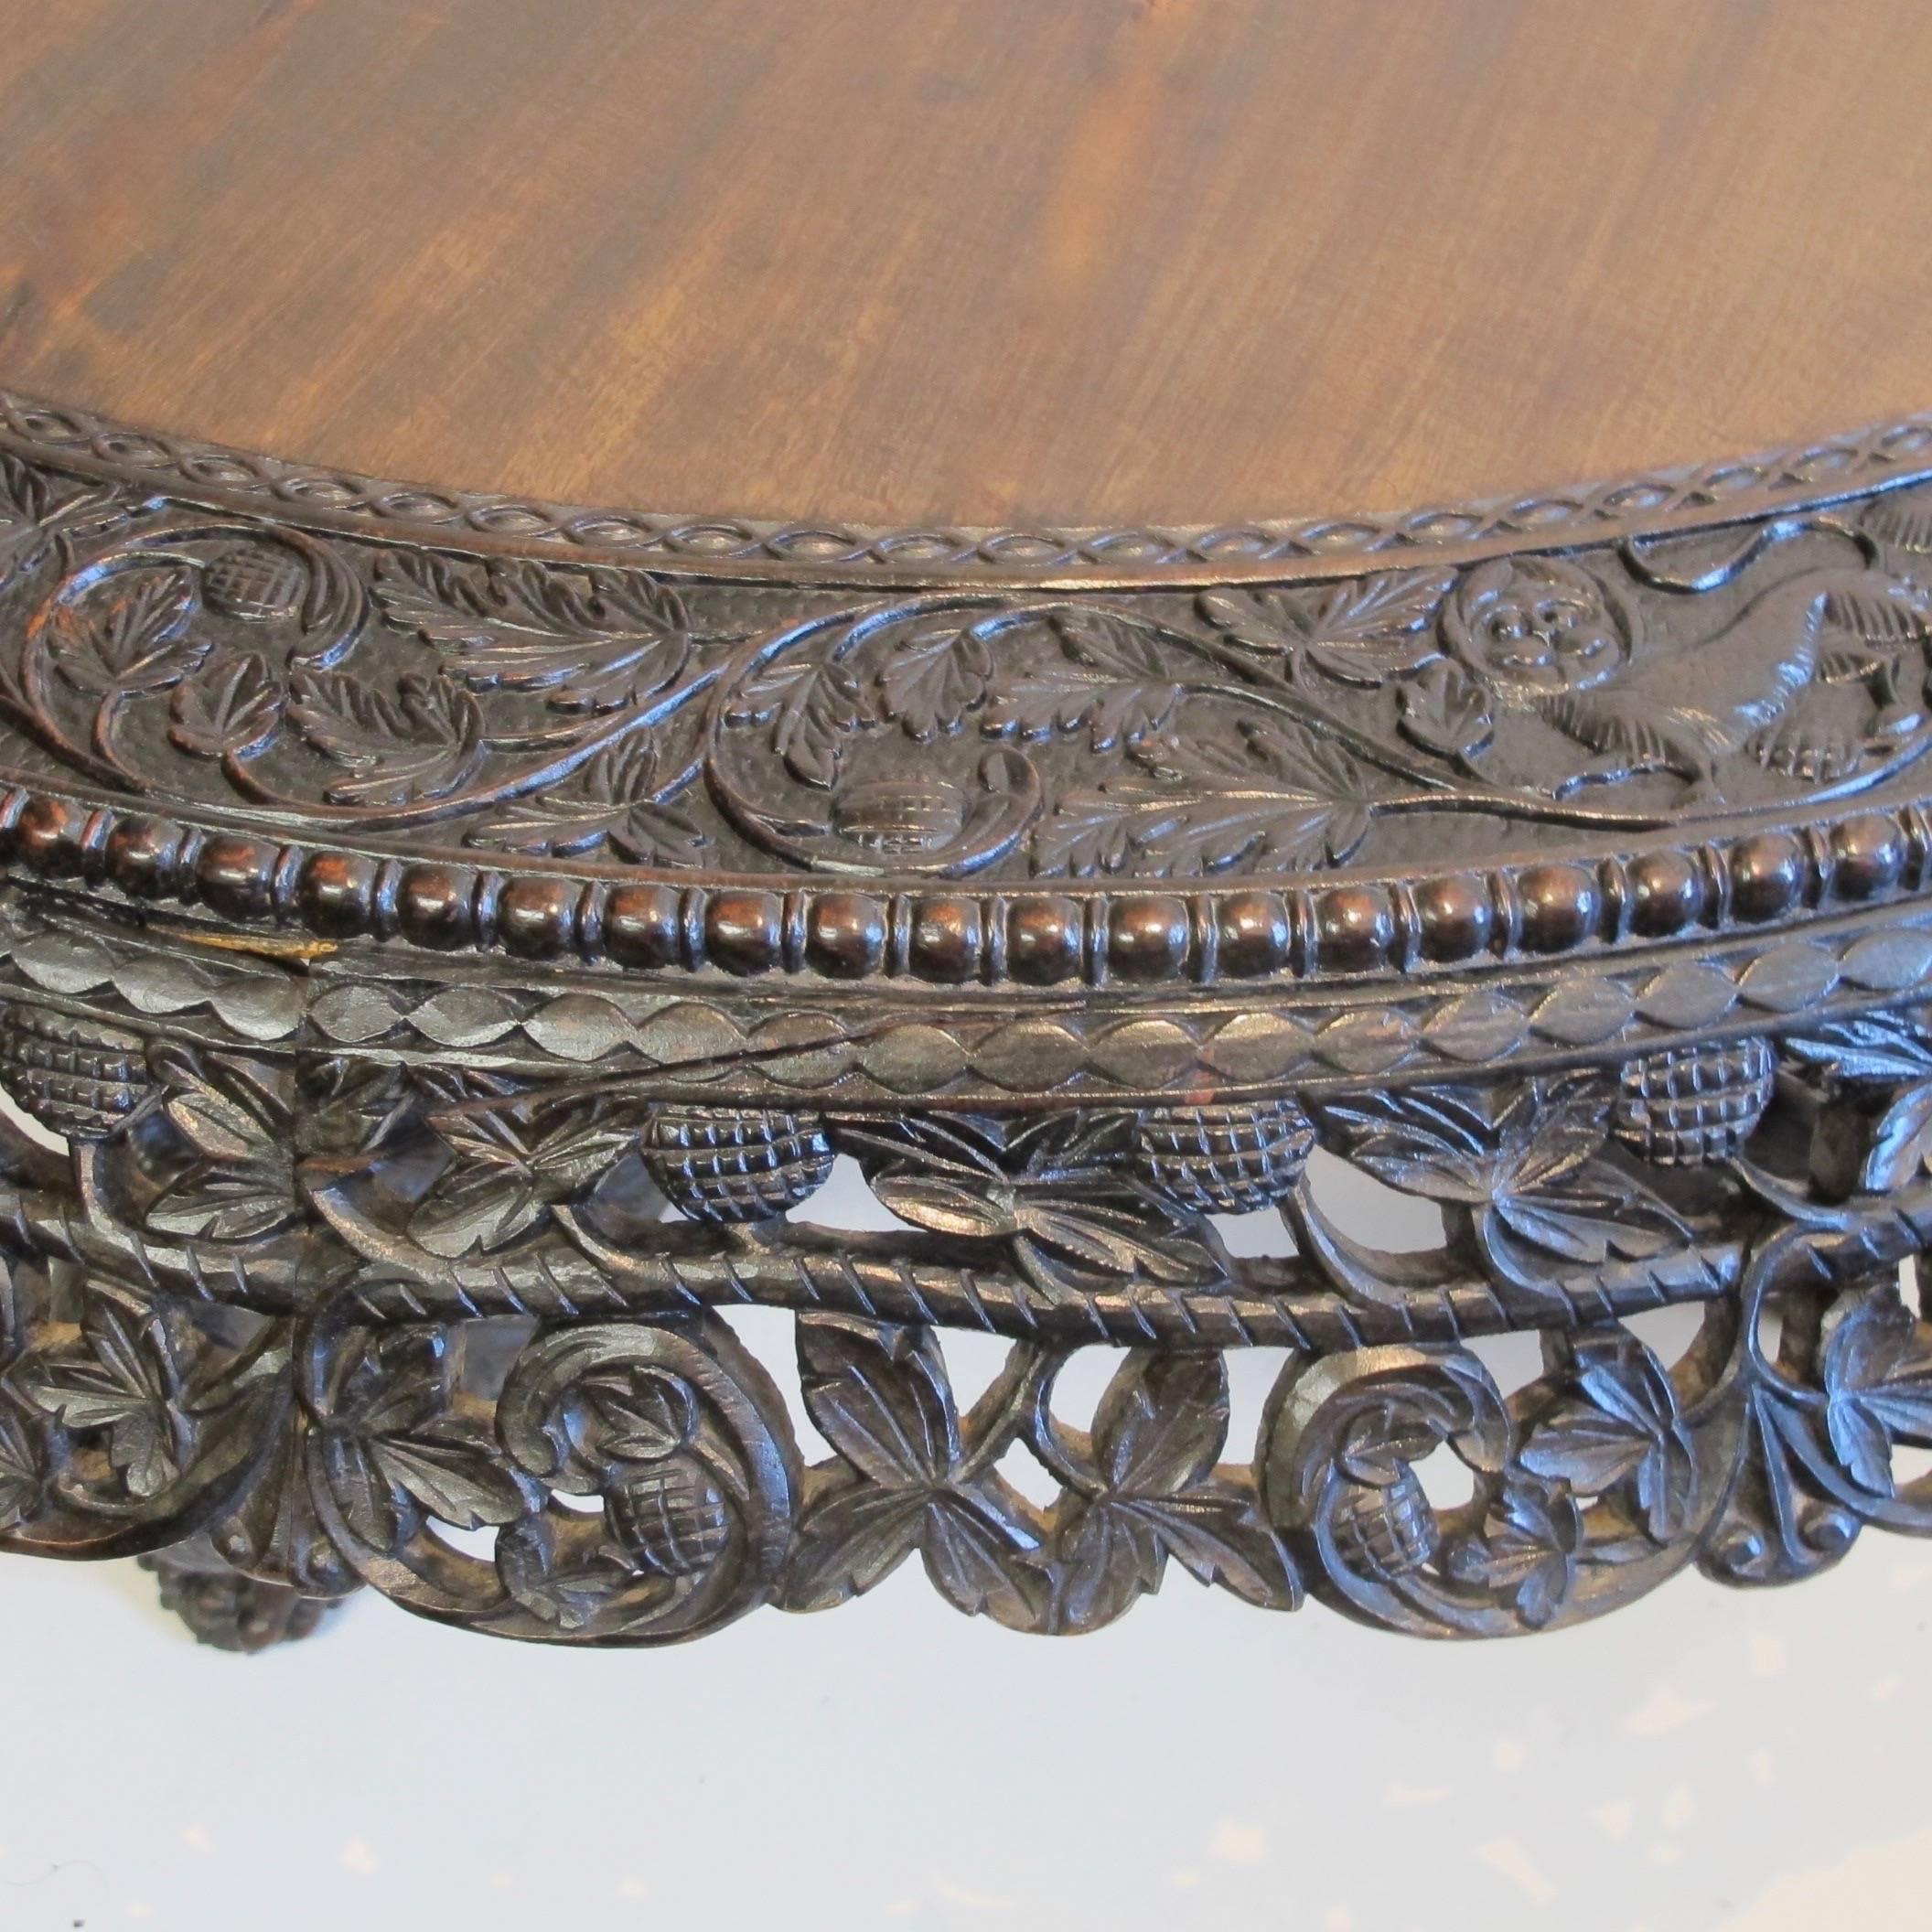 Large scale exceptional and extensively hand-carved Anglo-Indian tilt-top table of padouk wood and rosewood. Having dragons, birds, animals, and an intricately carved frieze, with an inset rosewood center surface.
Indian, mid-19th century.